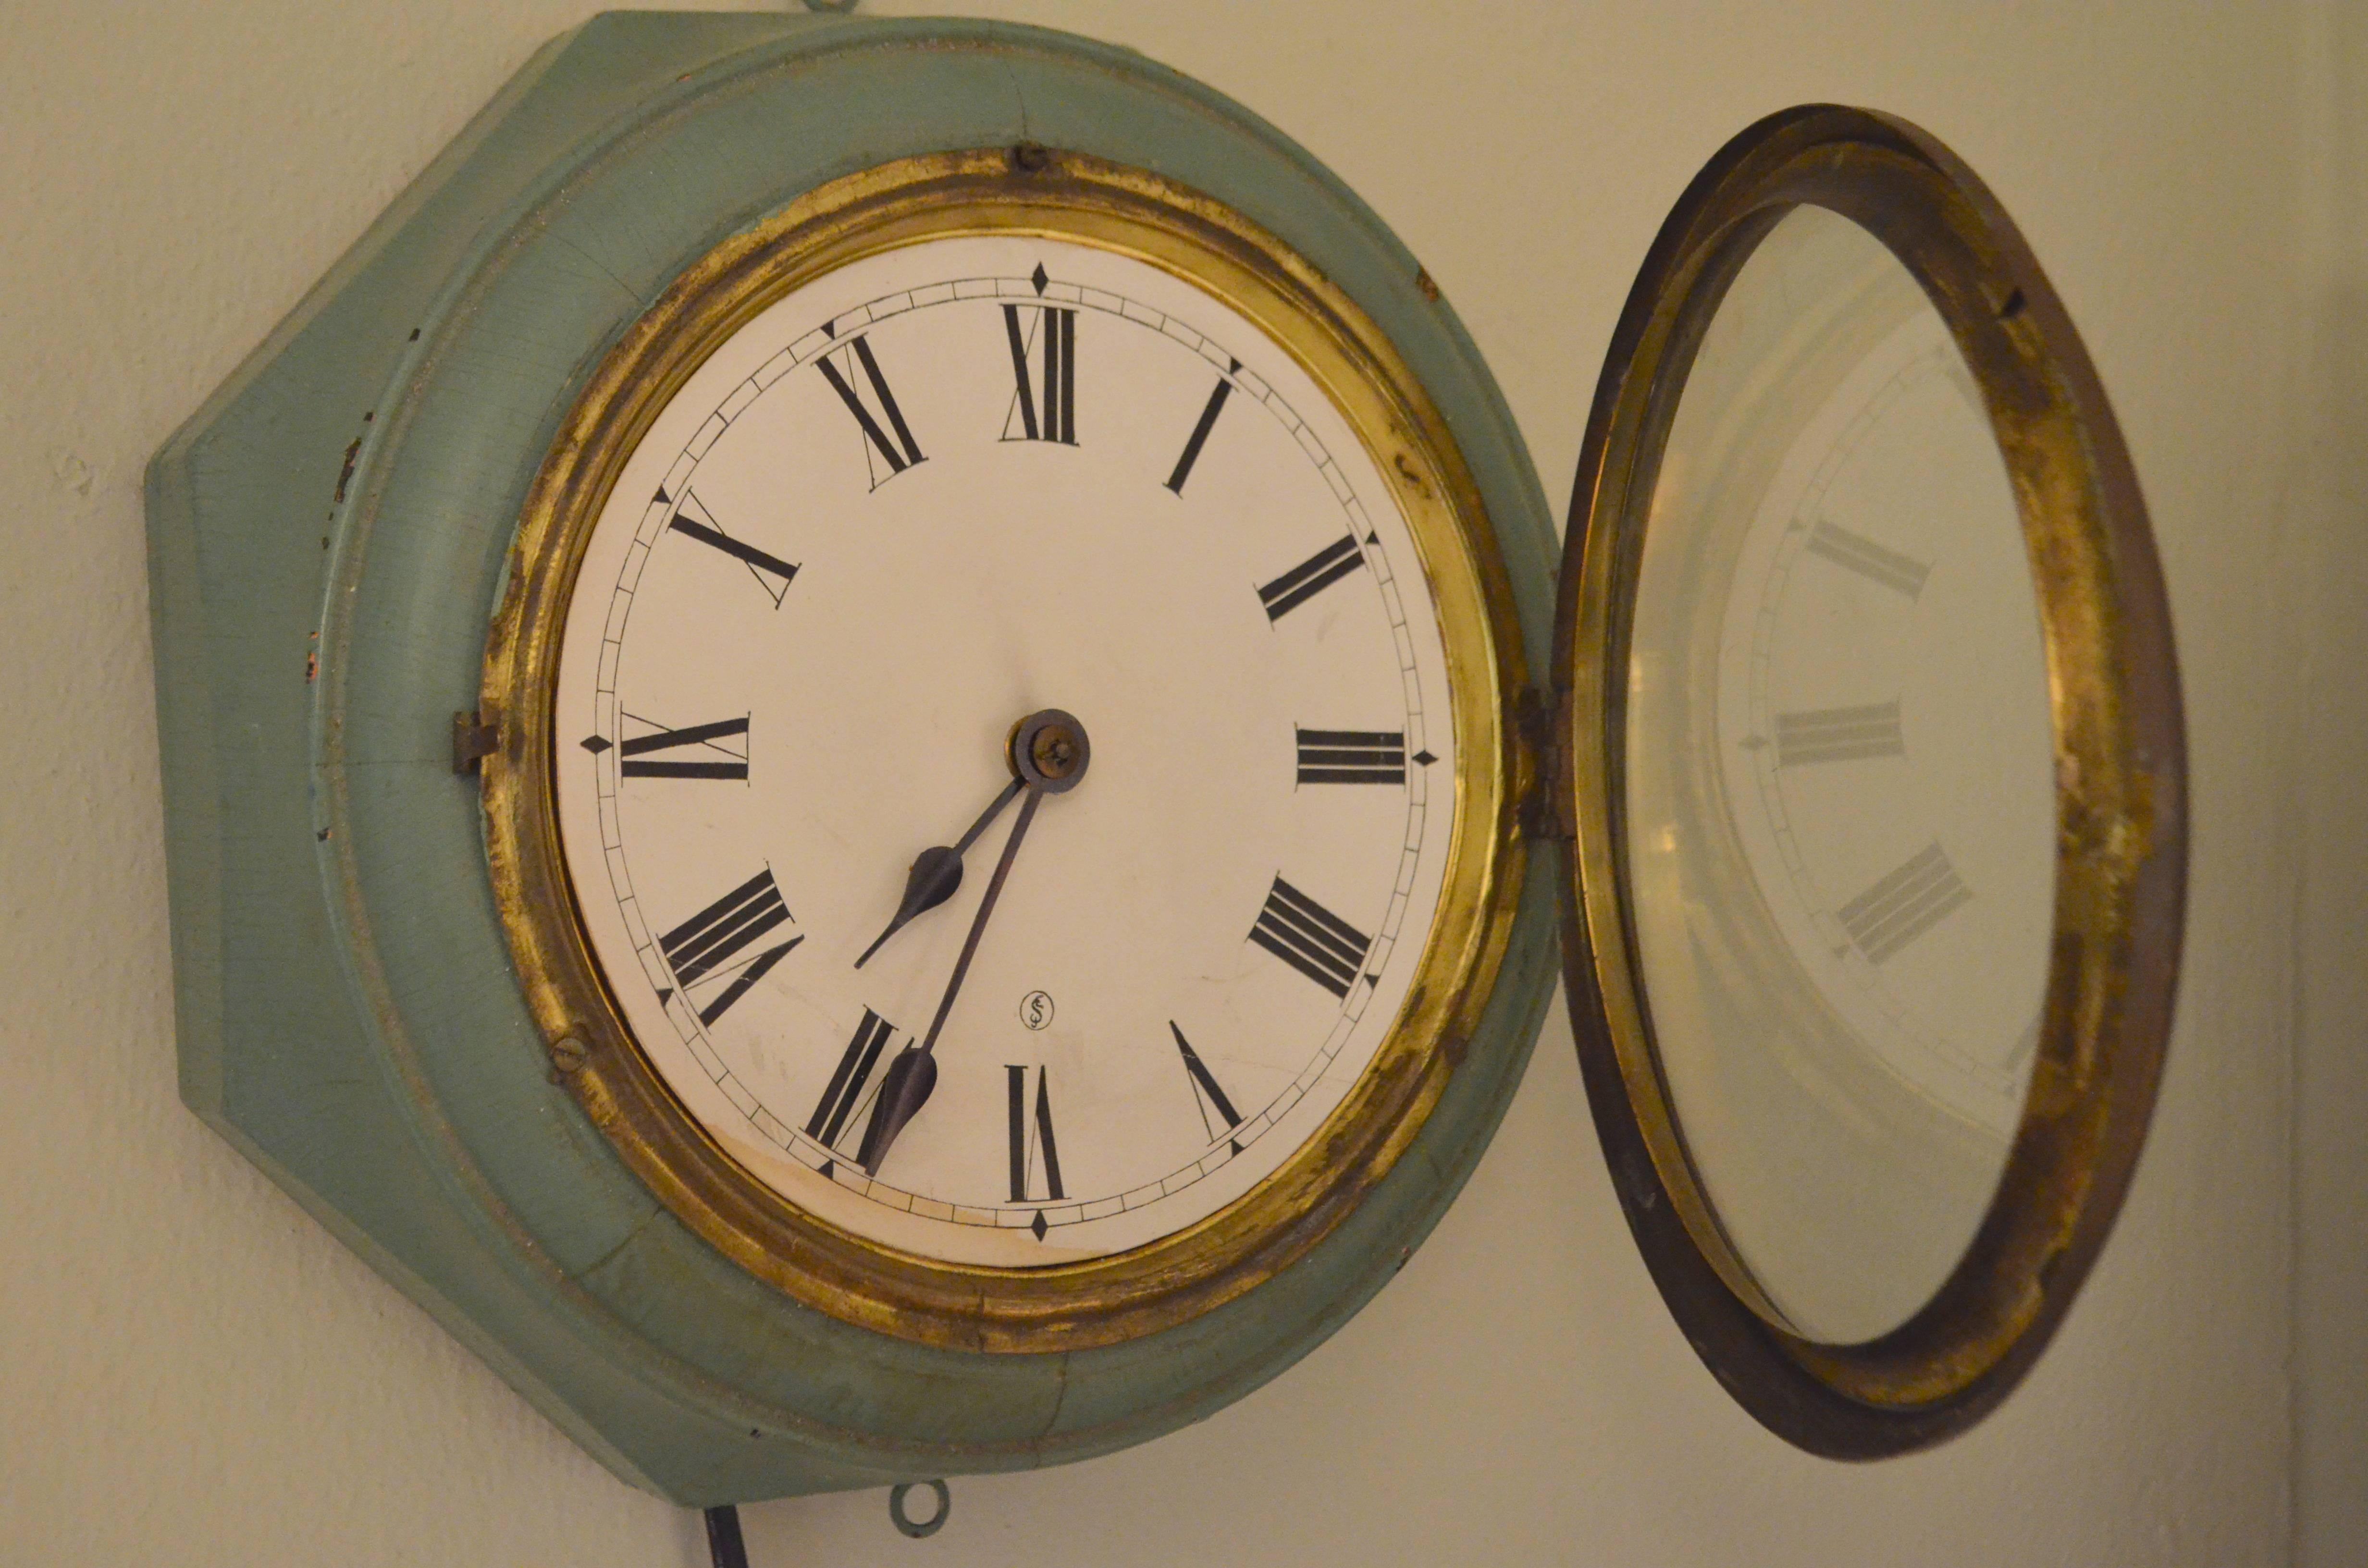 American Early 1900s Wooden Electric Wall Clock with Roman Numerals